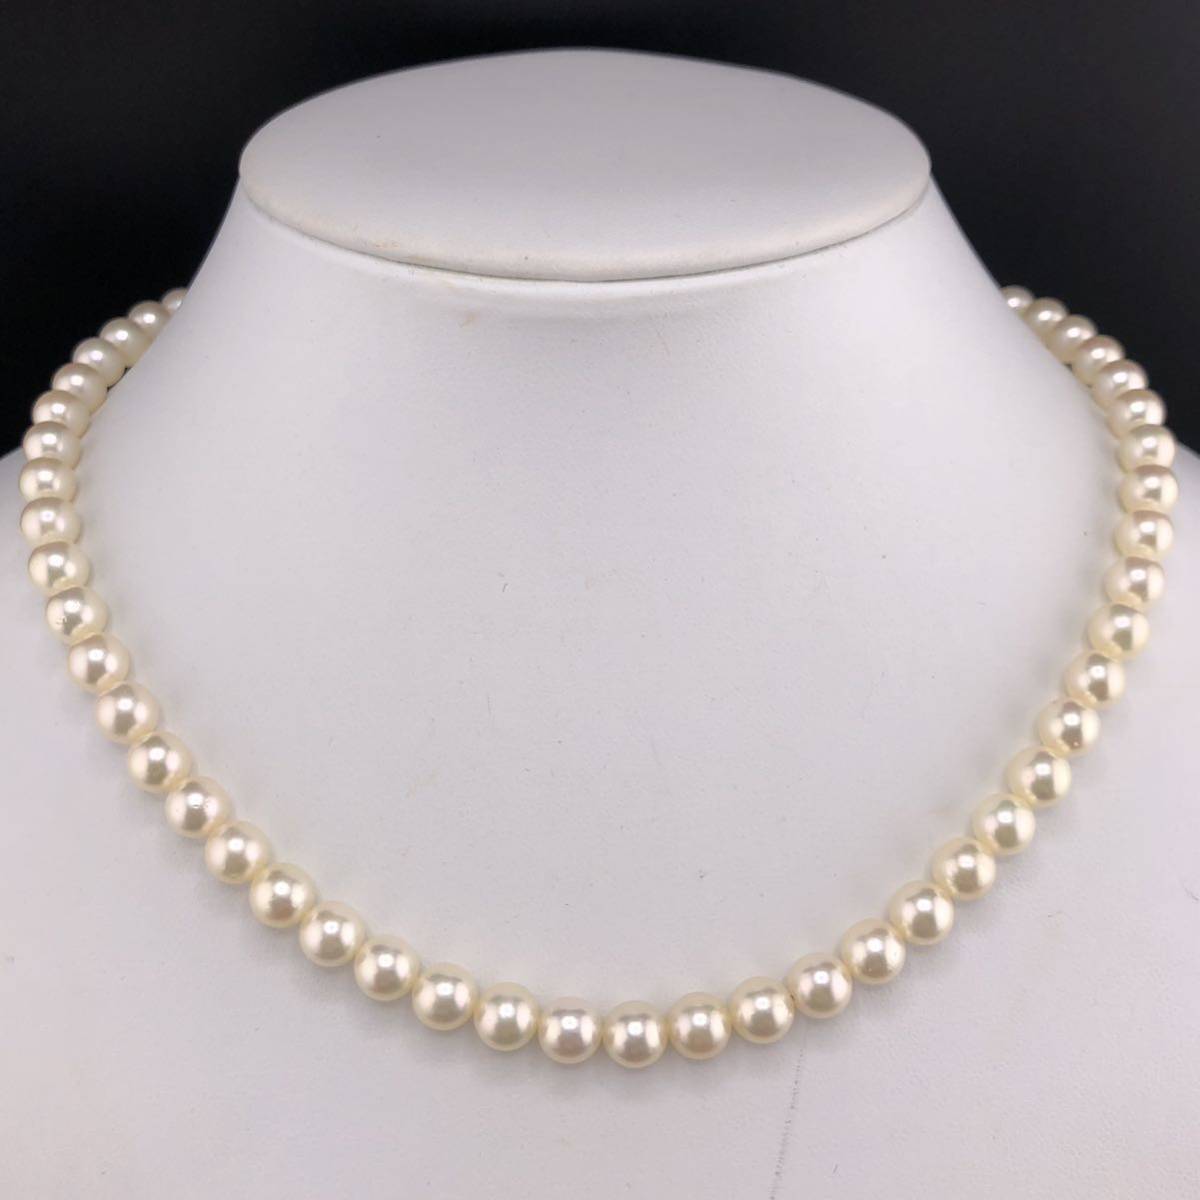 E10-0057 アコヤパールネックレス 6.5mm~7.0mm 43cm 29.6g (アコヤ真珠 Pearl necklace SILVER )